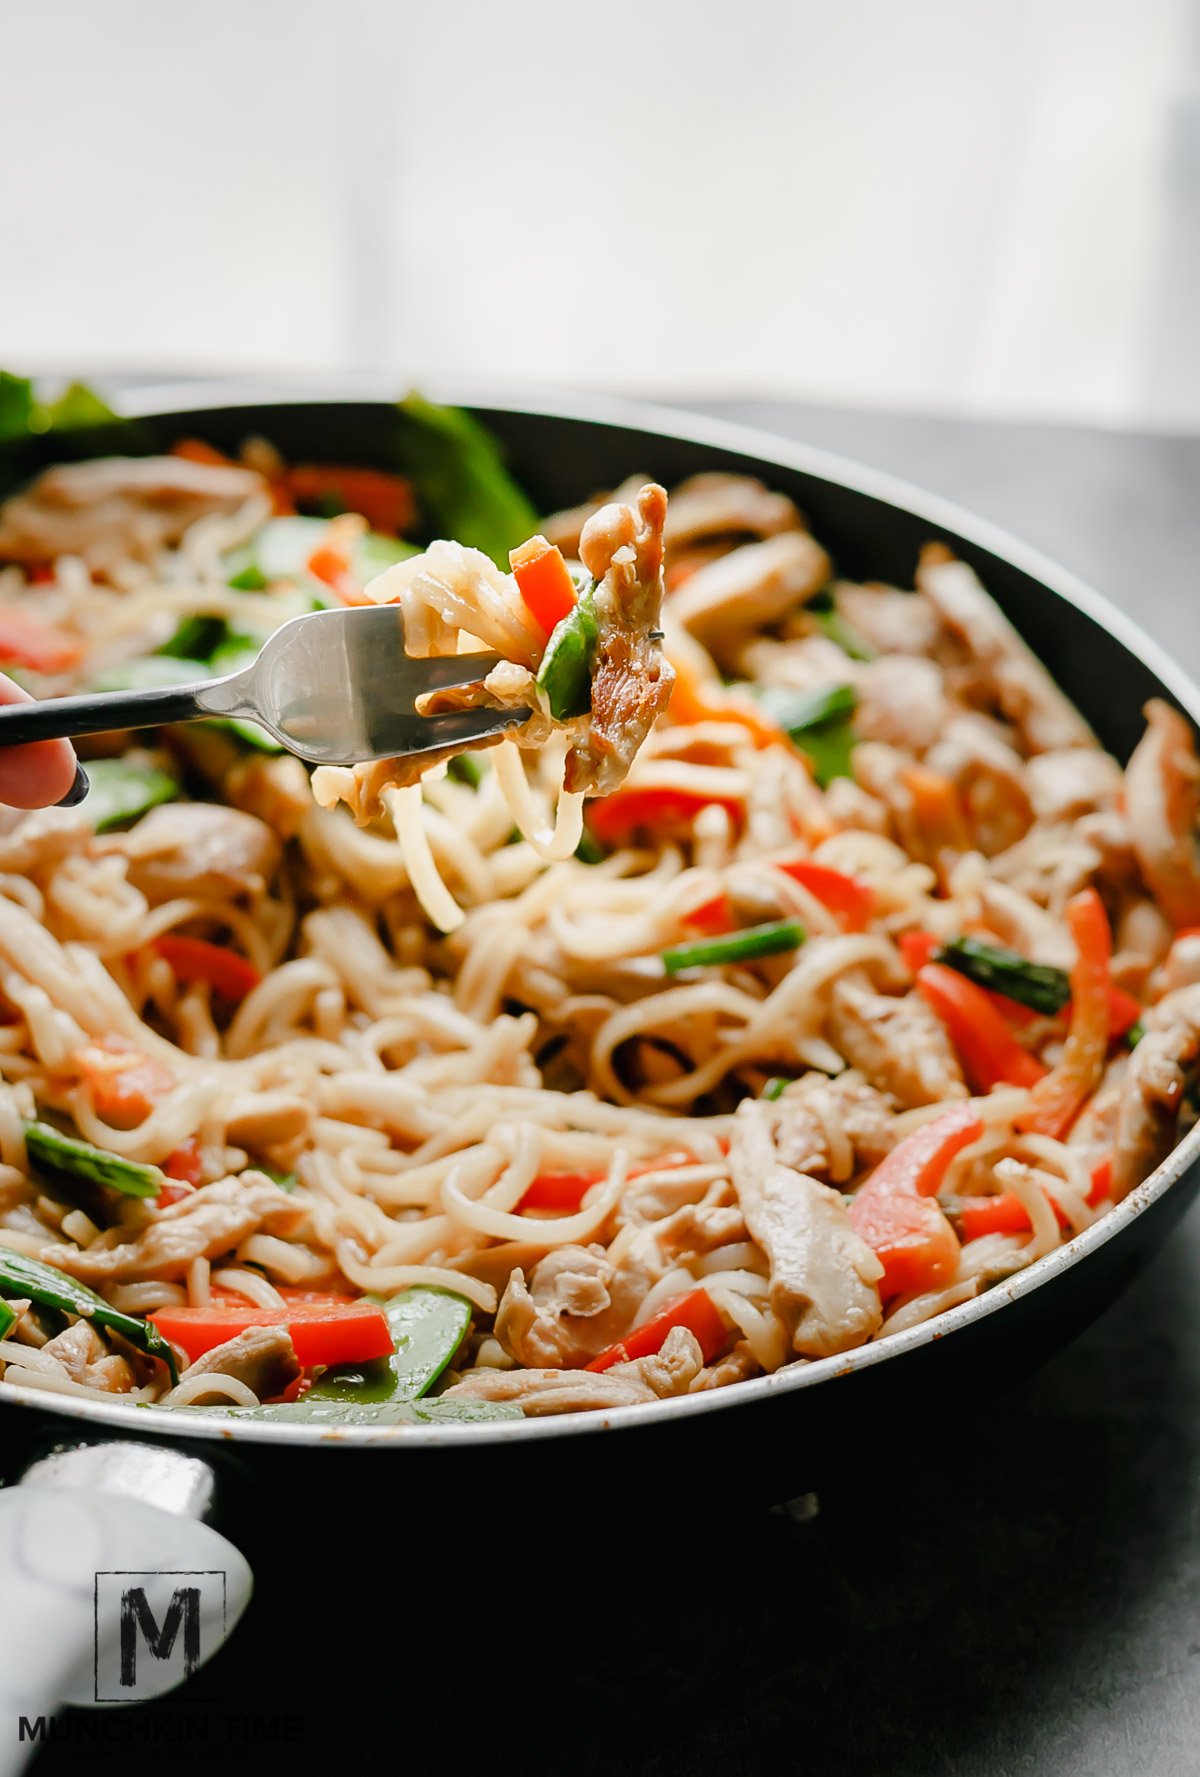 My munchkins absolutely love this easy stir fry chicken recipe for dinner.  Serve chicken and vegetable stir fry with a splash of sesame oil and extra soy sauce for flavor and you will have a one delicious one pot meal. 